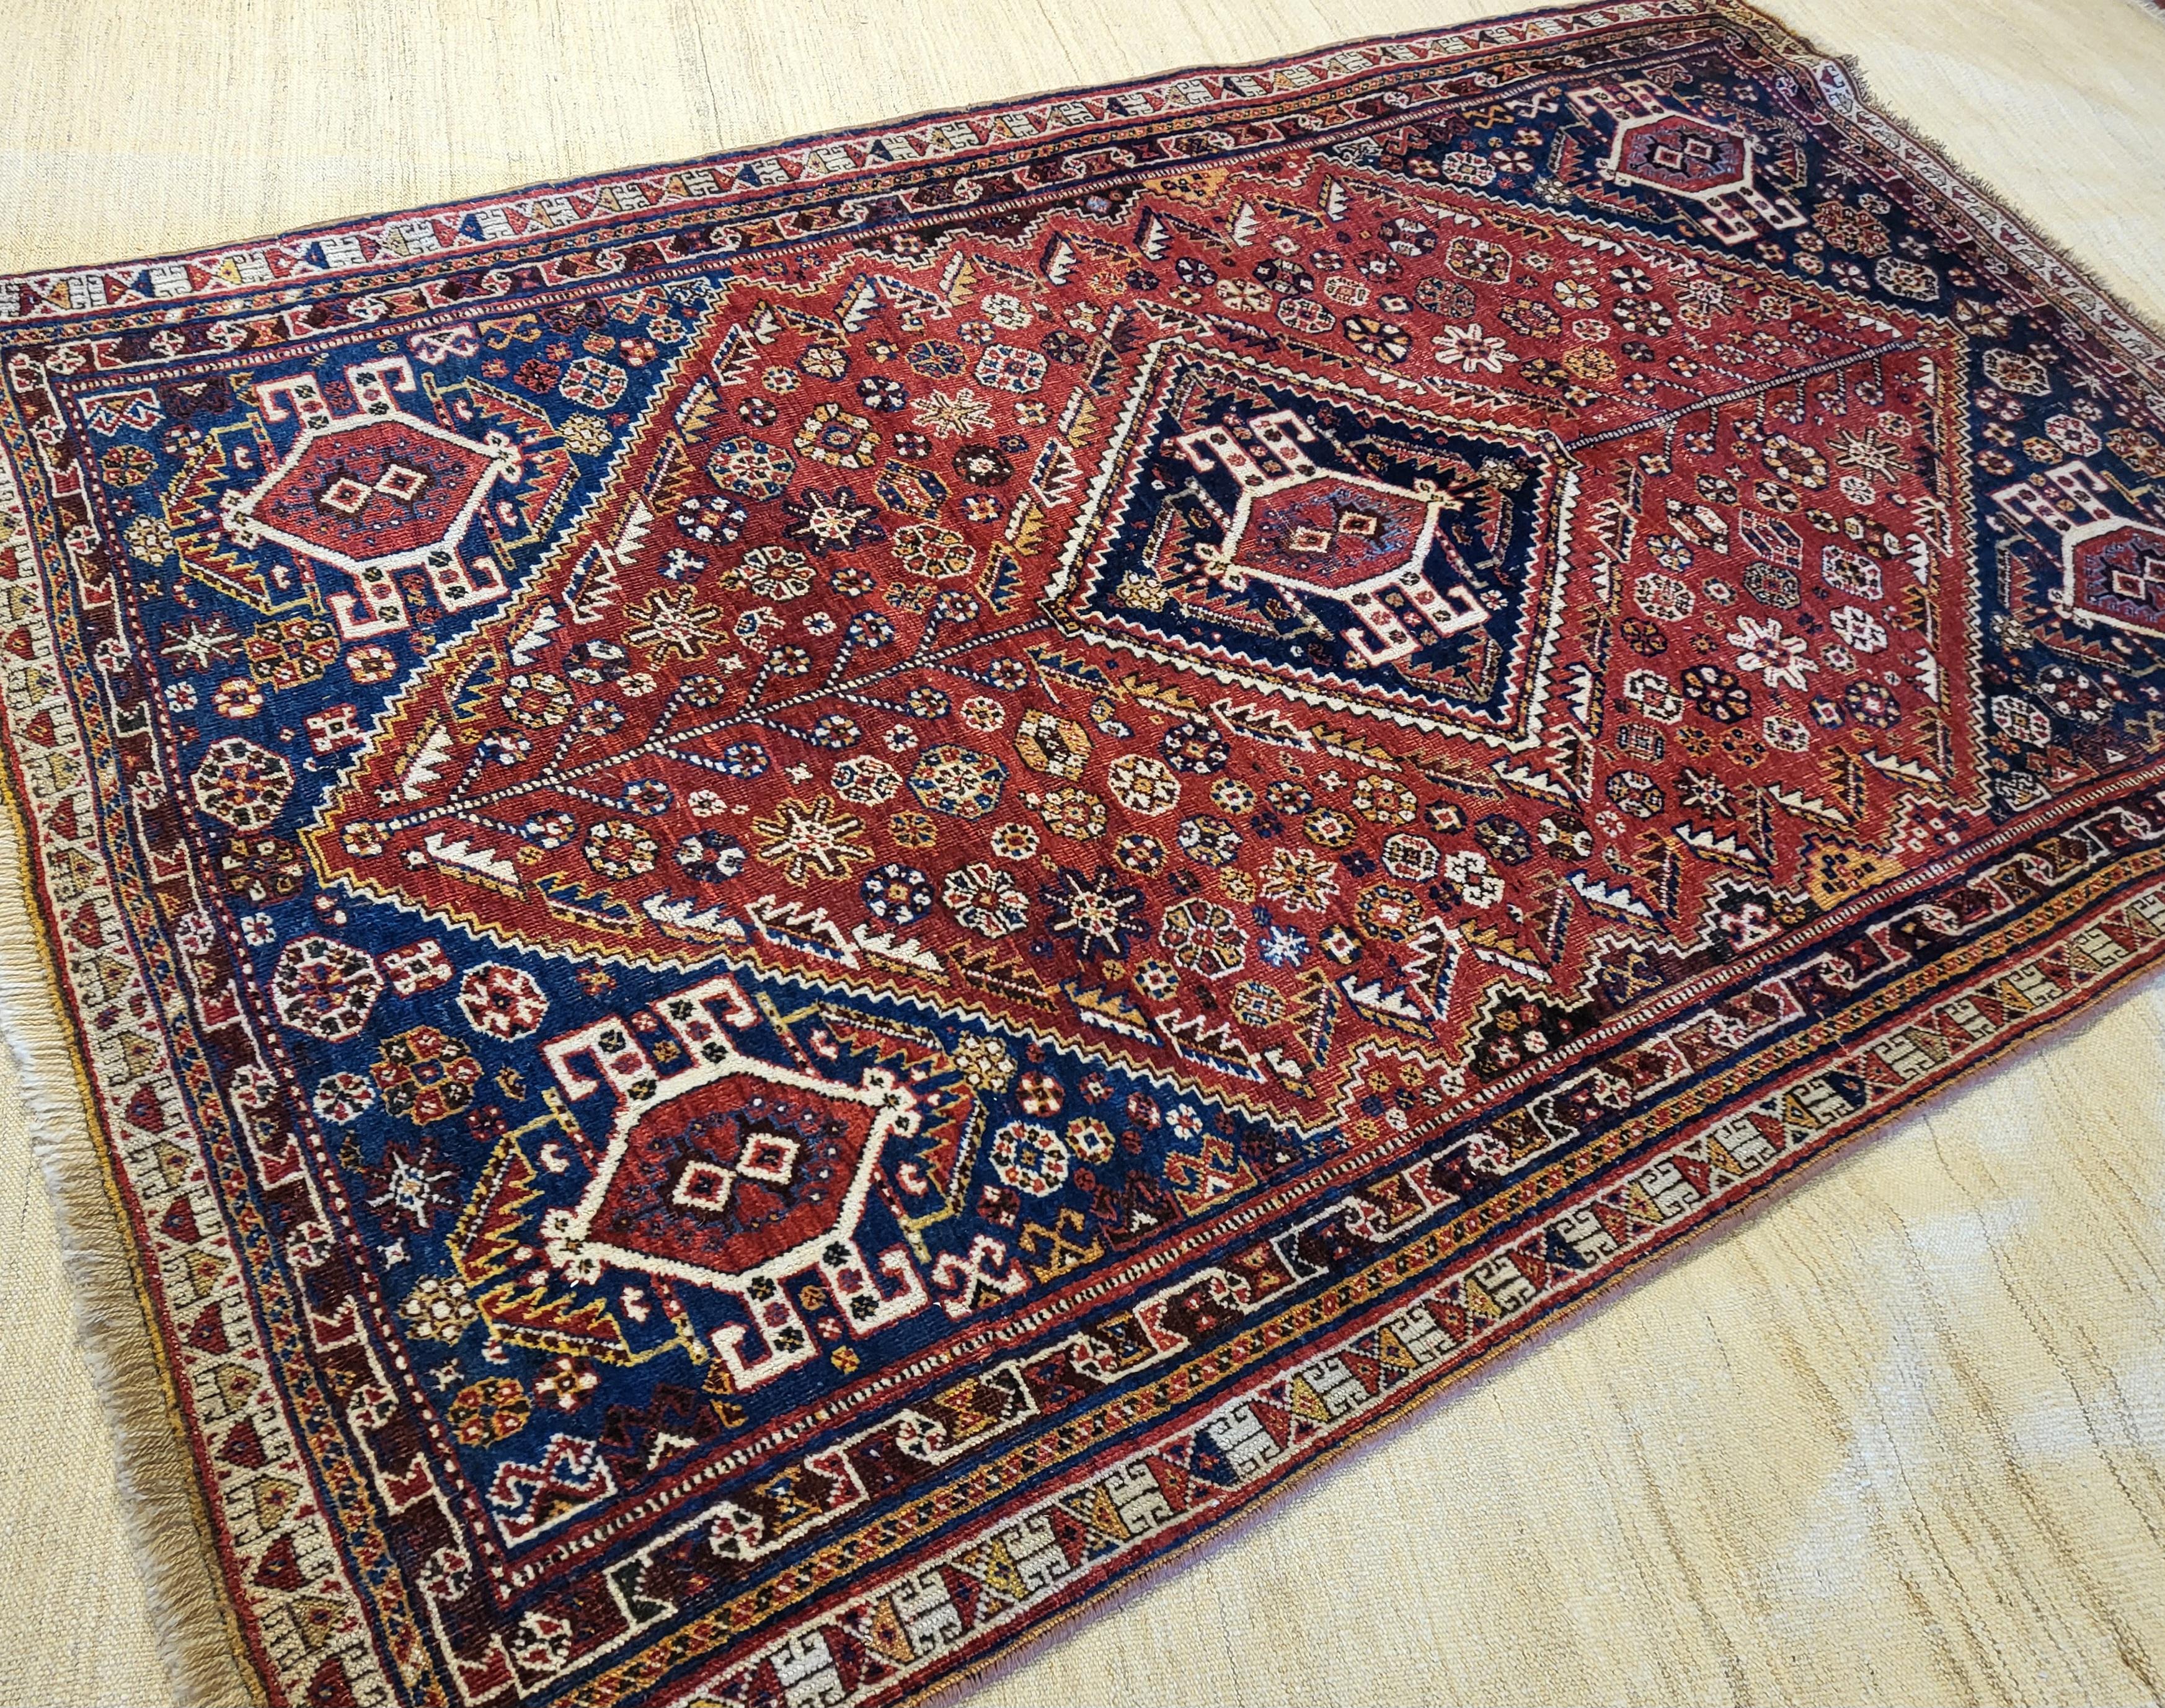 19th Century Late 1800's Qashqai - Nomadic Persian Rug - PRG Exclusive For Sale